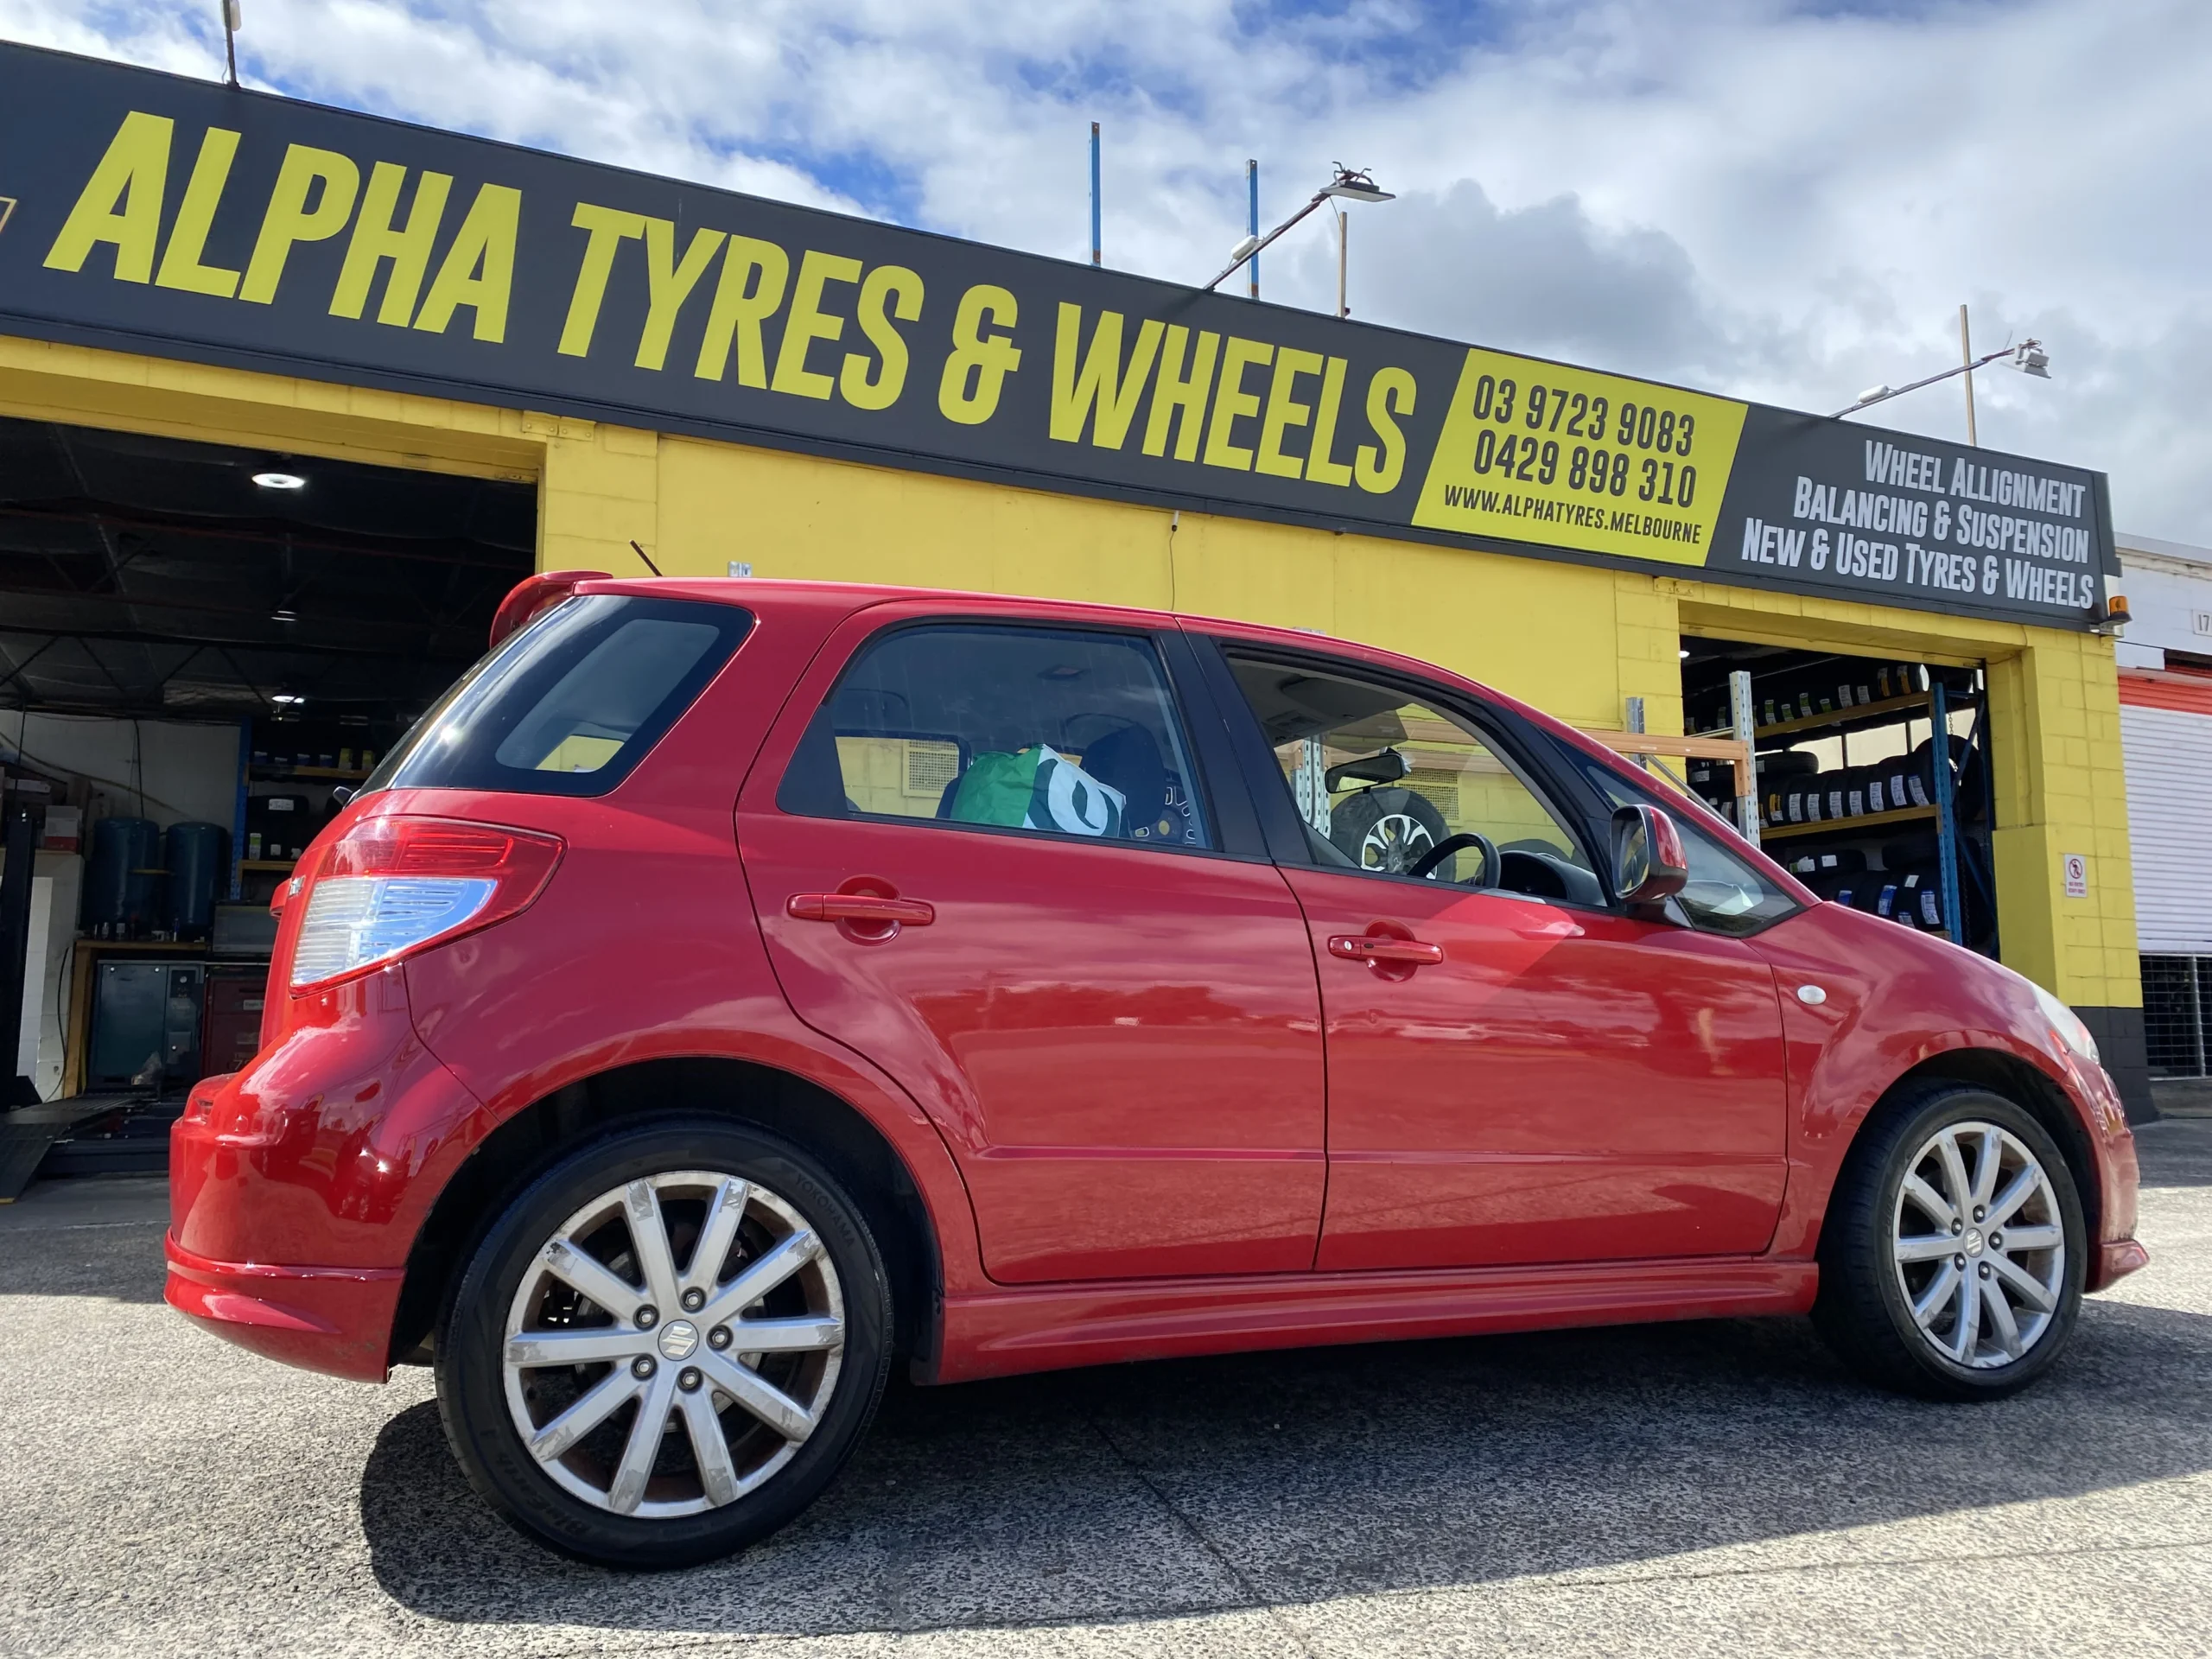 A wide selection of alloy wheels on display at Alpha Tyres and Wheels